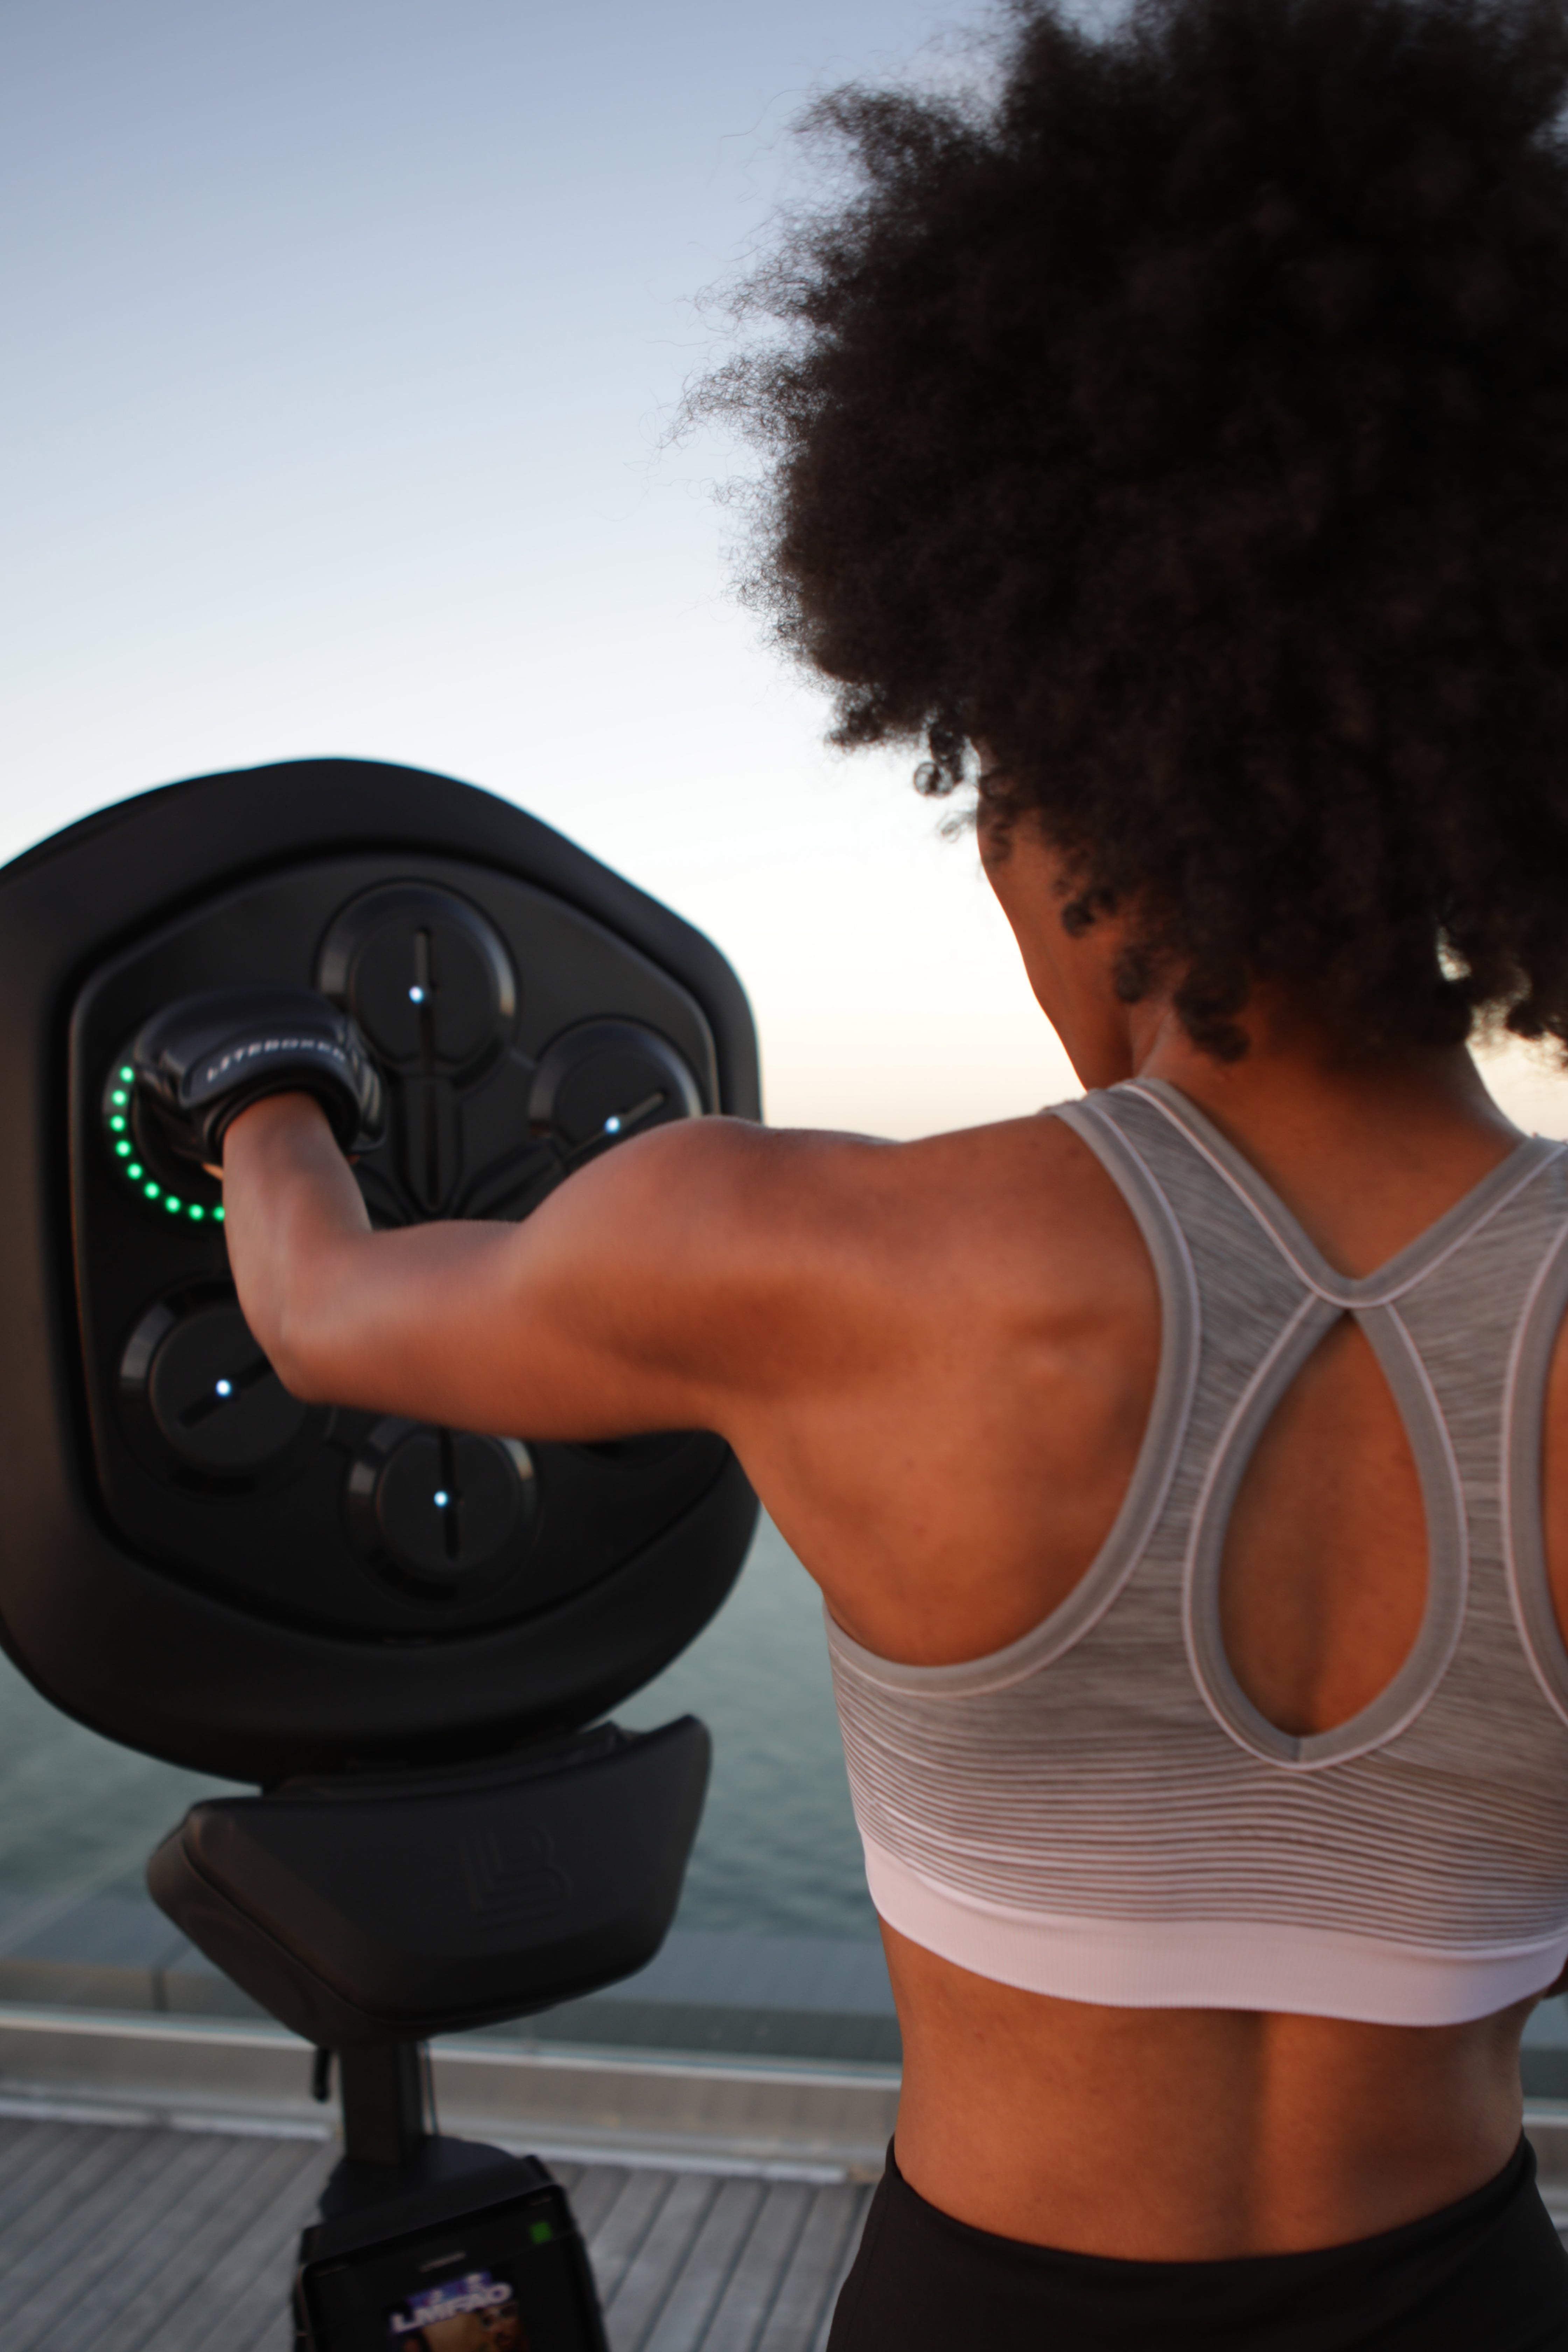 Liteboxer review: Get a fun home boxing workout with this smart boxing  system - Reviewed